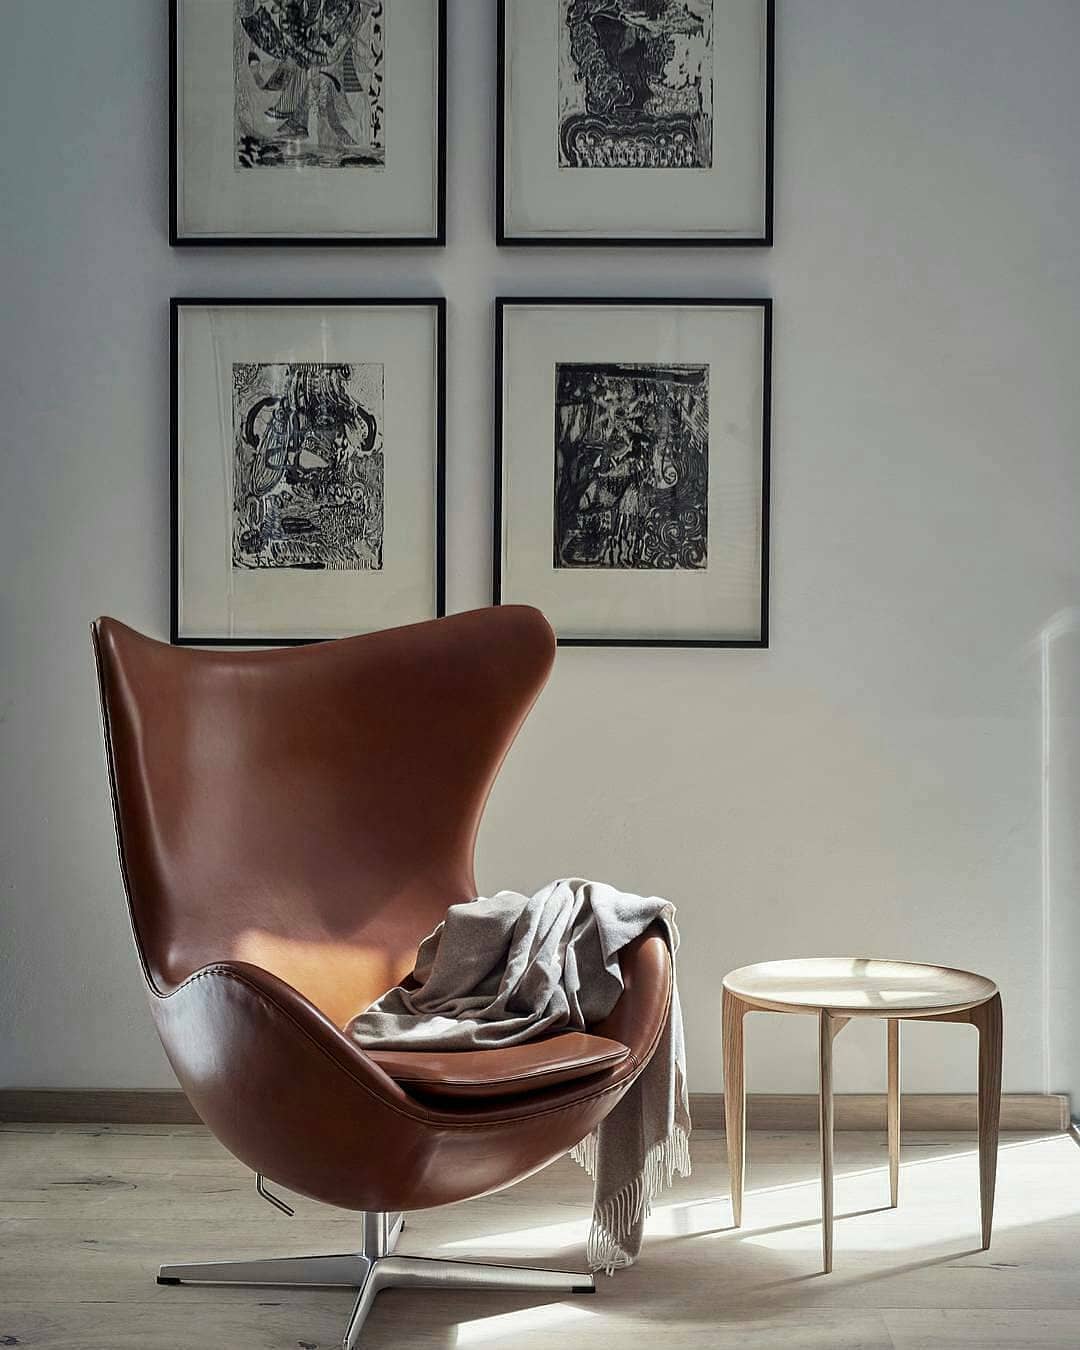 Arne Jacobsen design cognac brown leather egg chair. Photo by Instagram user @dyeowna